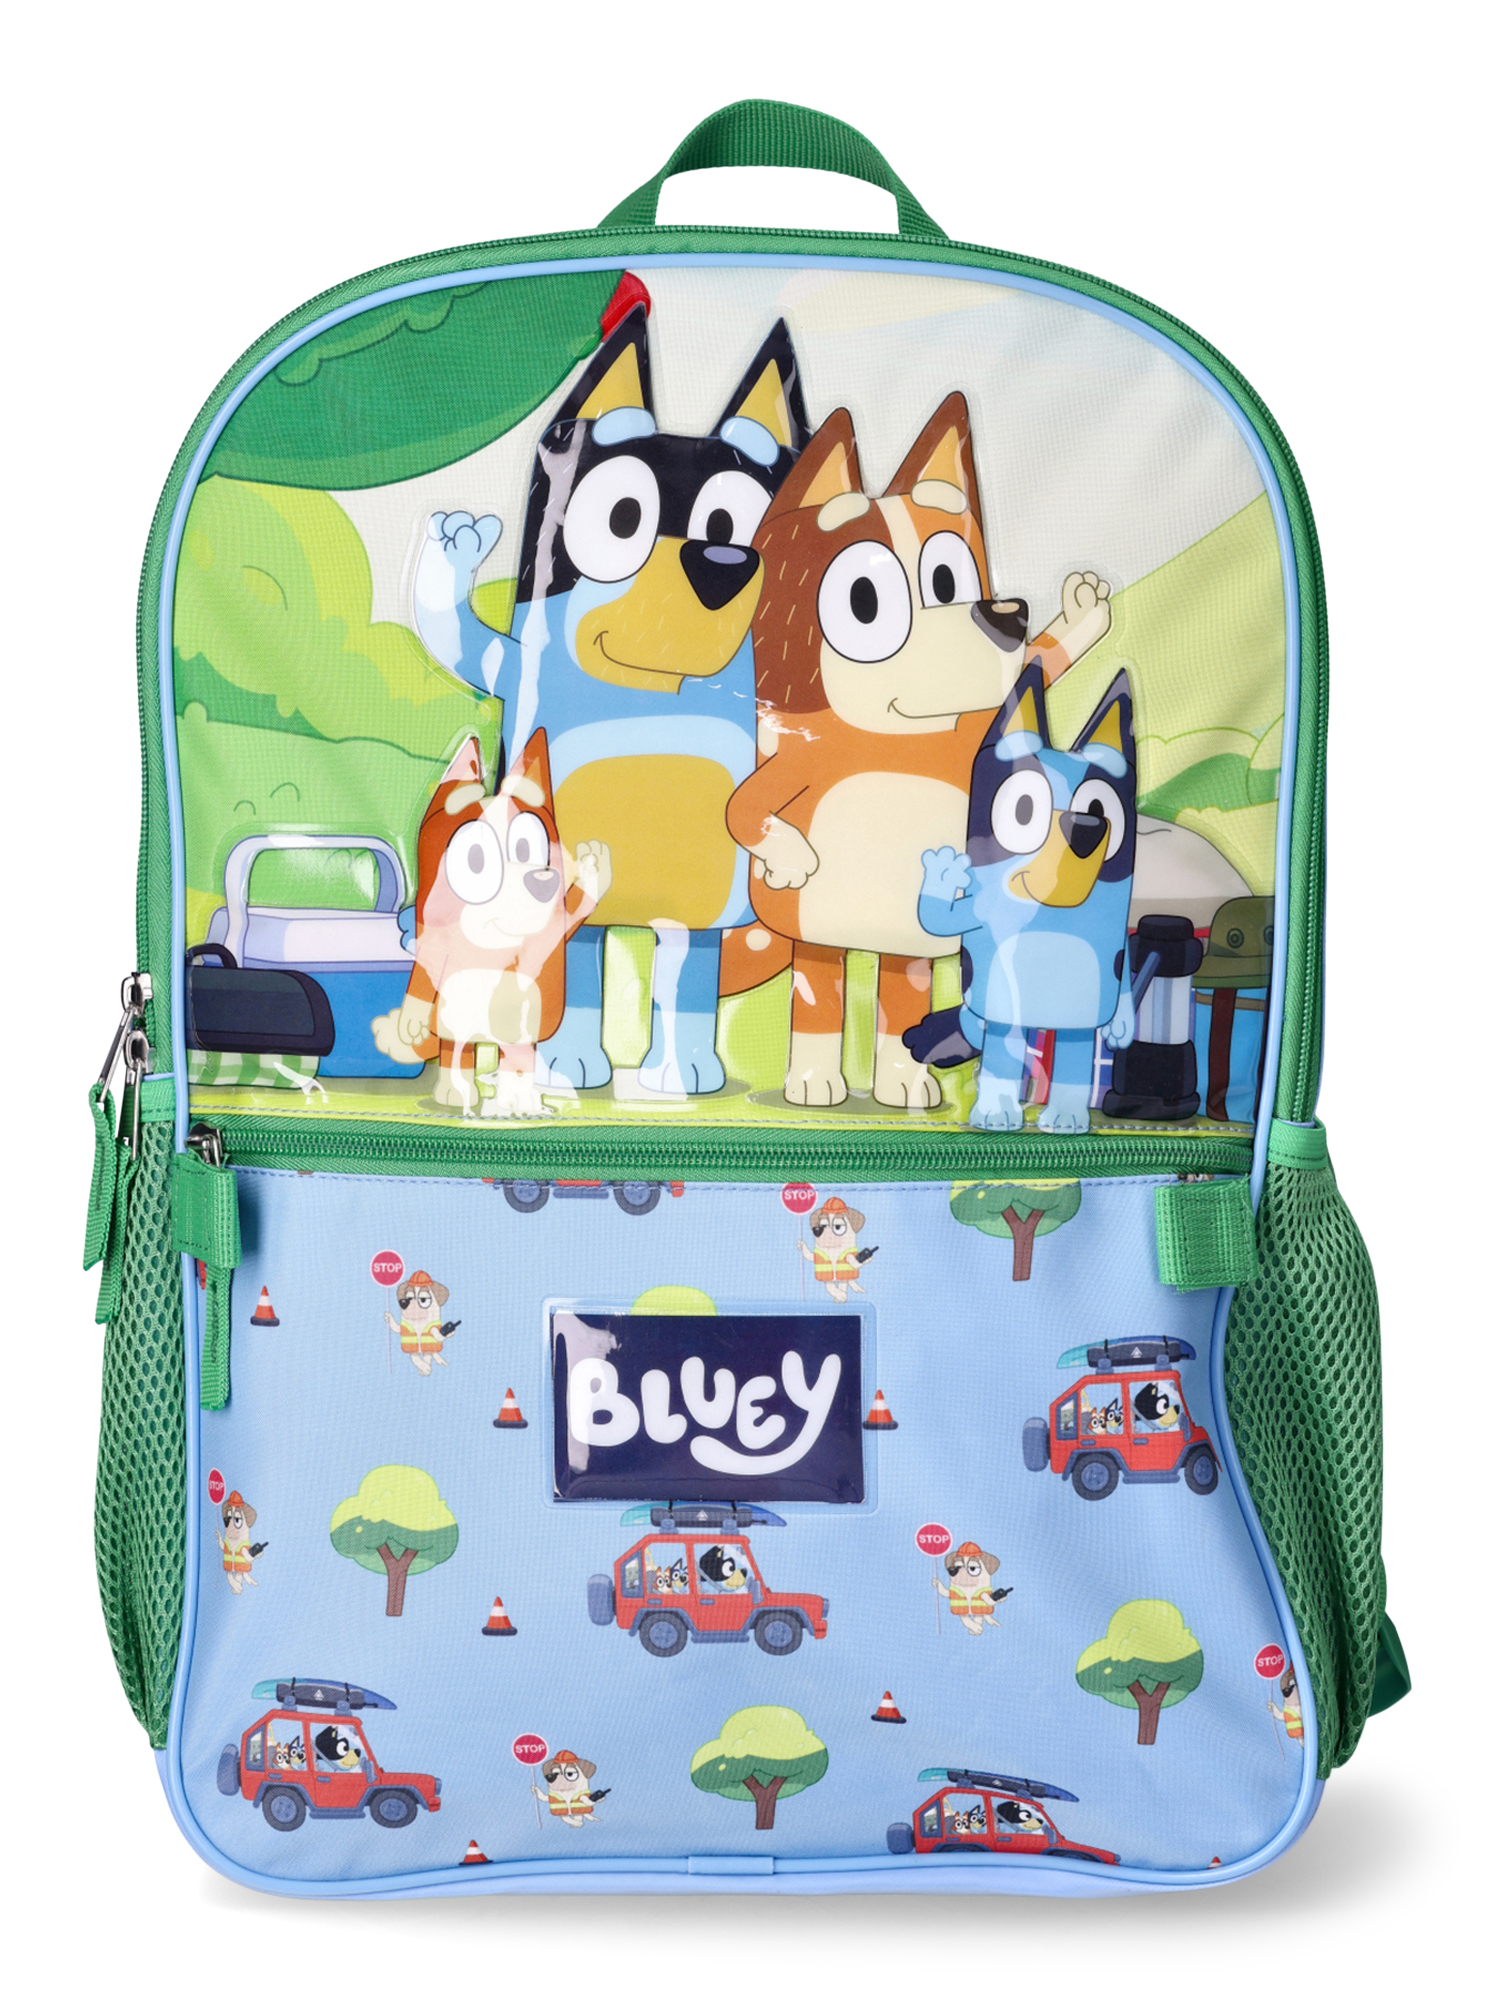 BBC Bluey Family Trip Children’s Laptop Backpack with Lunch Bag, 2-Piece Set - image 2 of 8